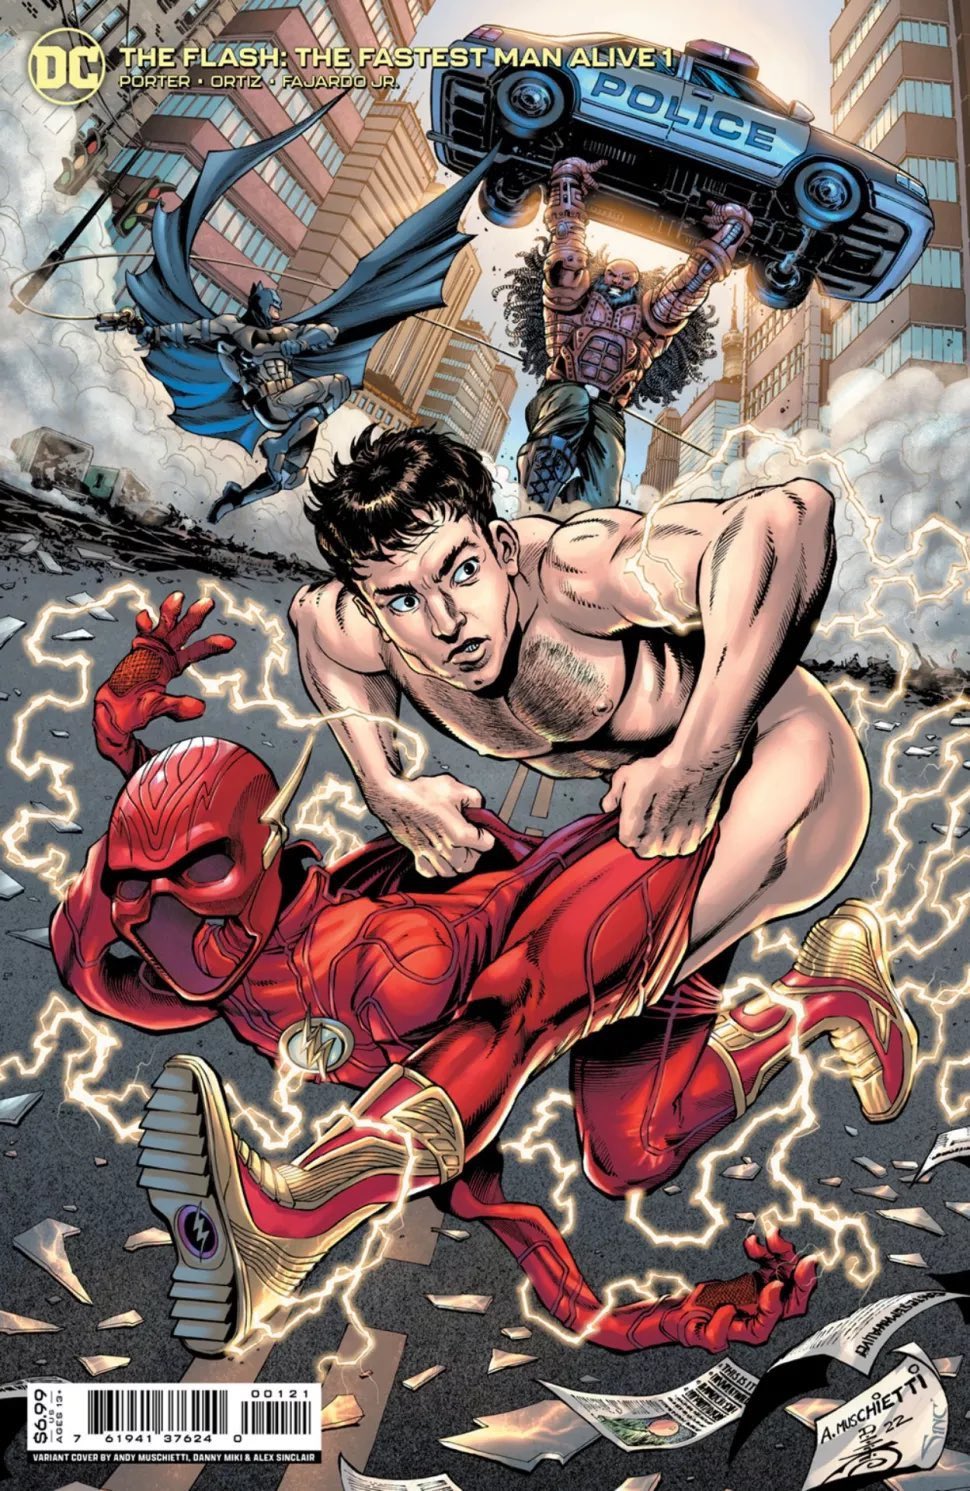 Half-Naked Barry Allen. Blue and Gray Suit Batman on The Flash Prequel  Variant Cover. - FILM JUNKEE